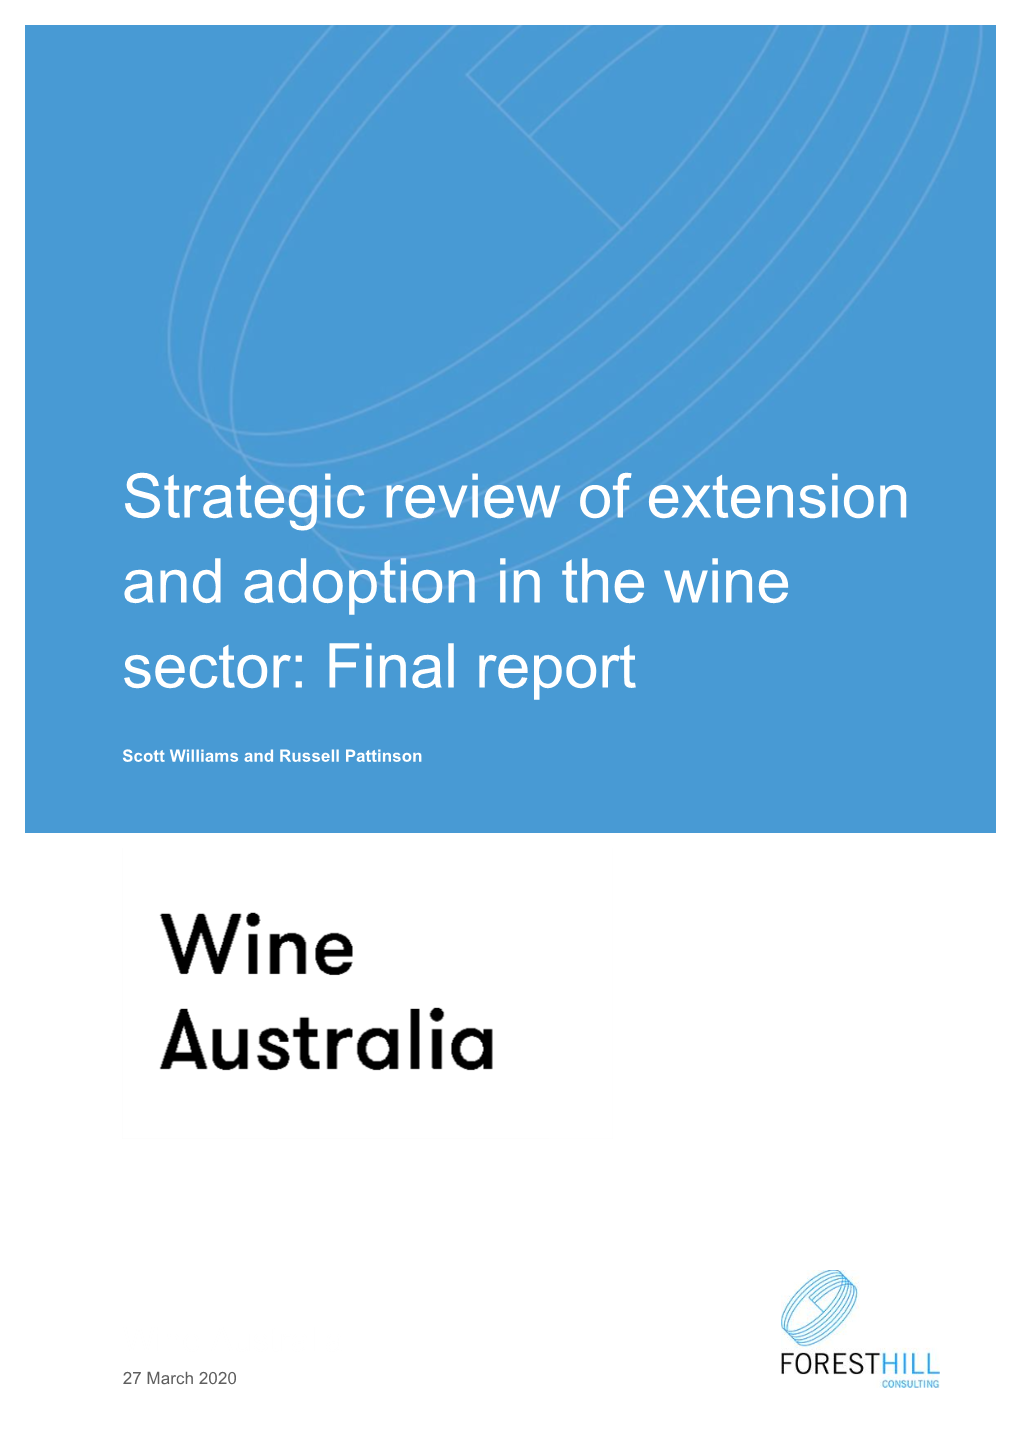 Strategic Review of Extension and Adoption in the Wine Sector: Final Report